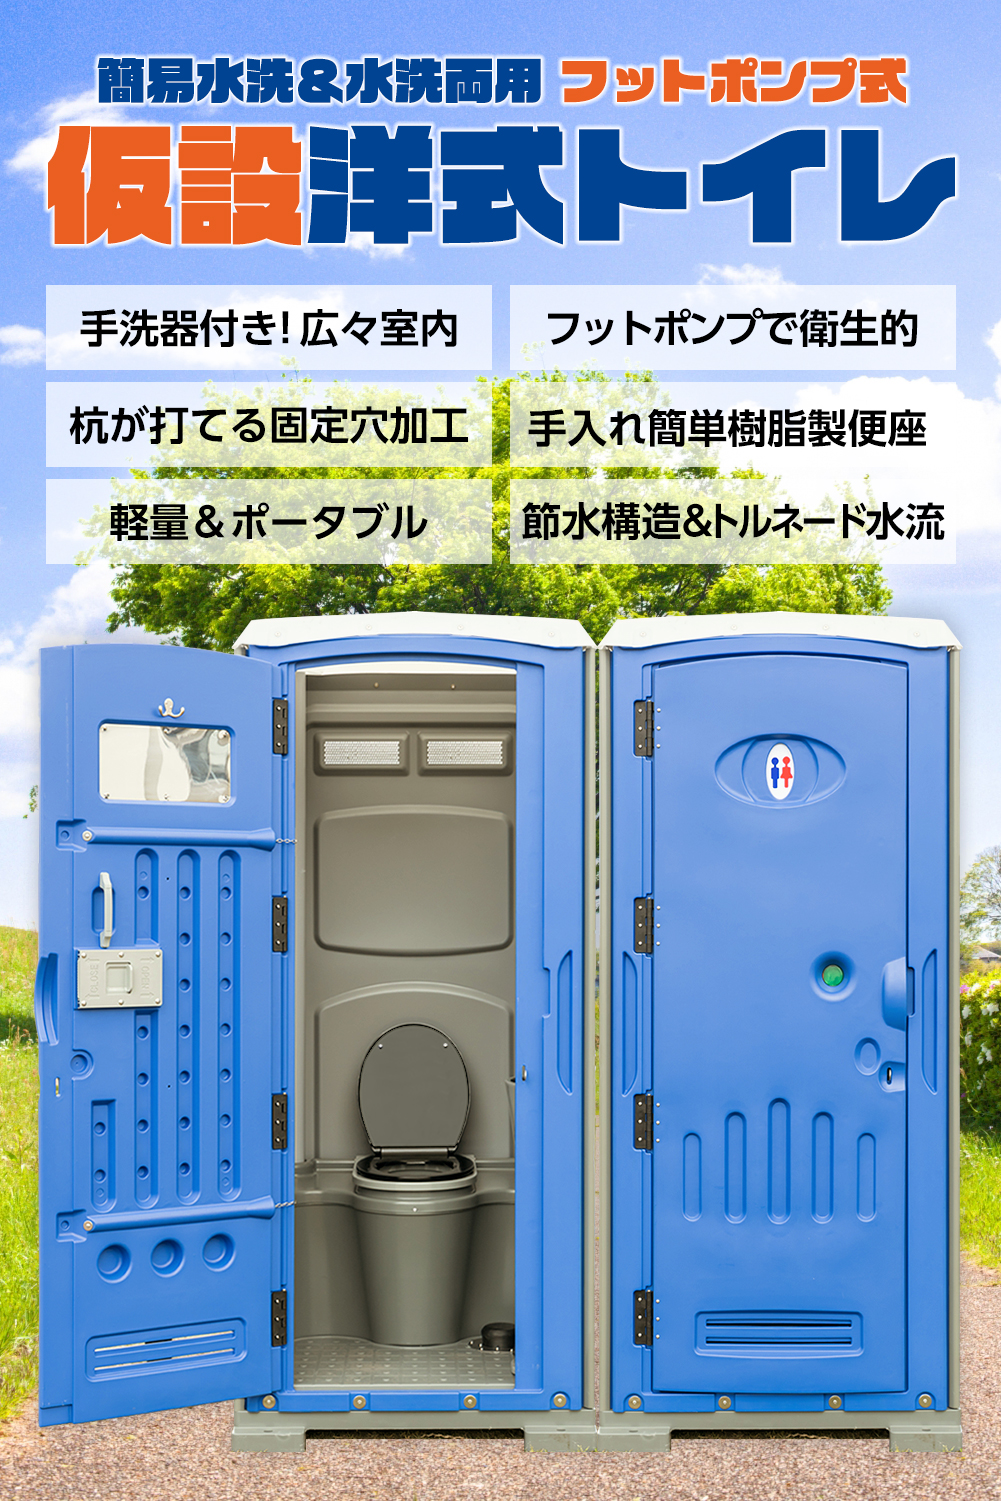 [ construction ending ] temporary toilet foot pump type simple flushing (.. taking .)&amp; under water drainage both for western style toilet seat so-f dispenser wash-basin attaching site for toilet temporary flight place disaster for 